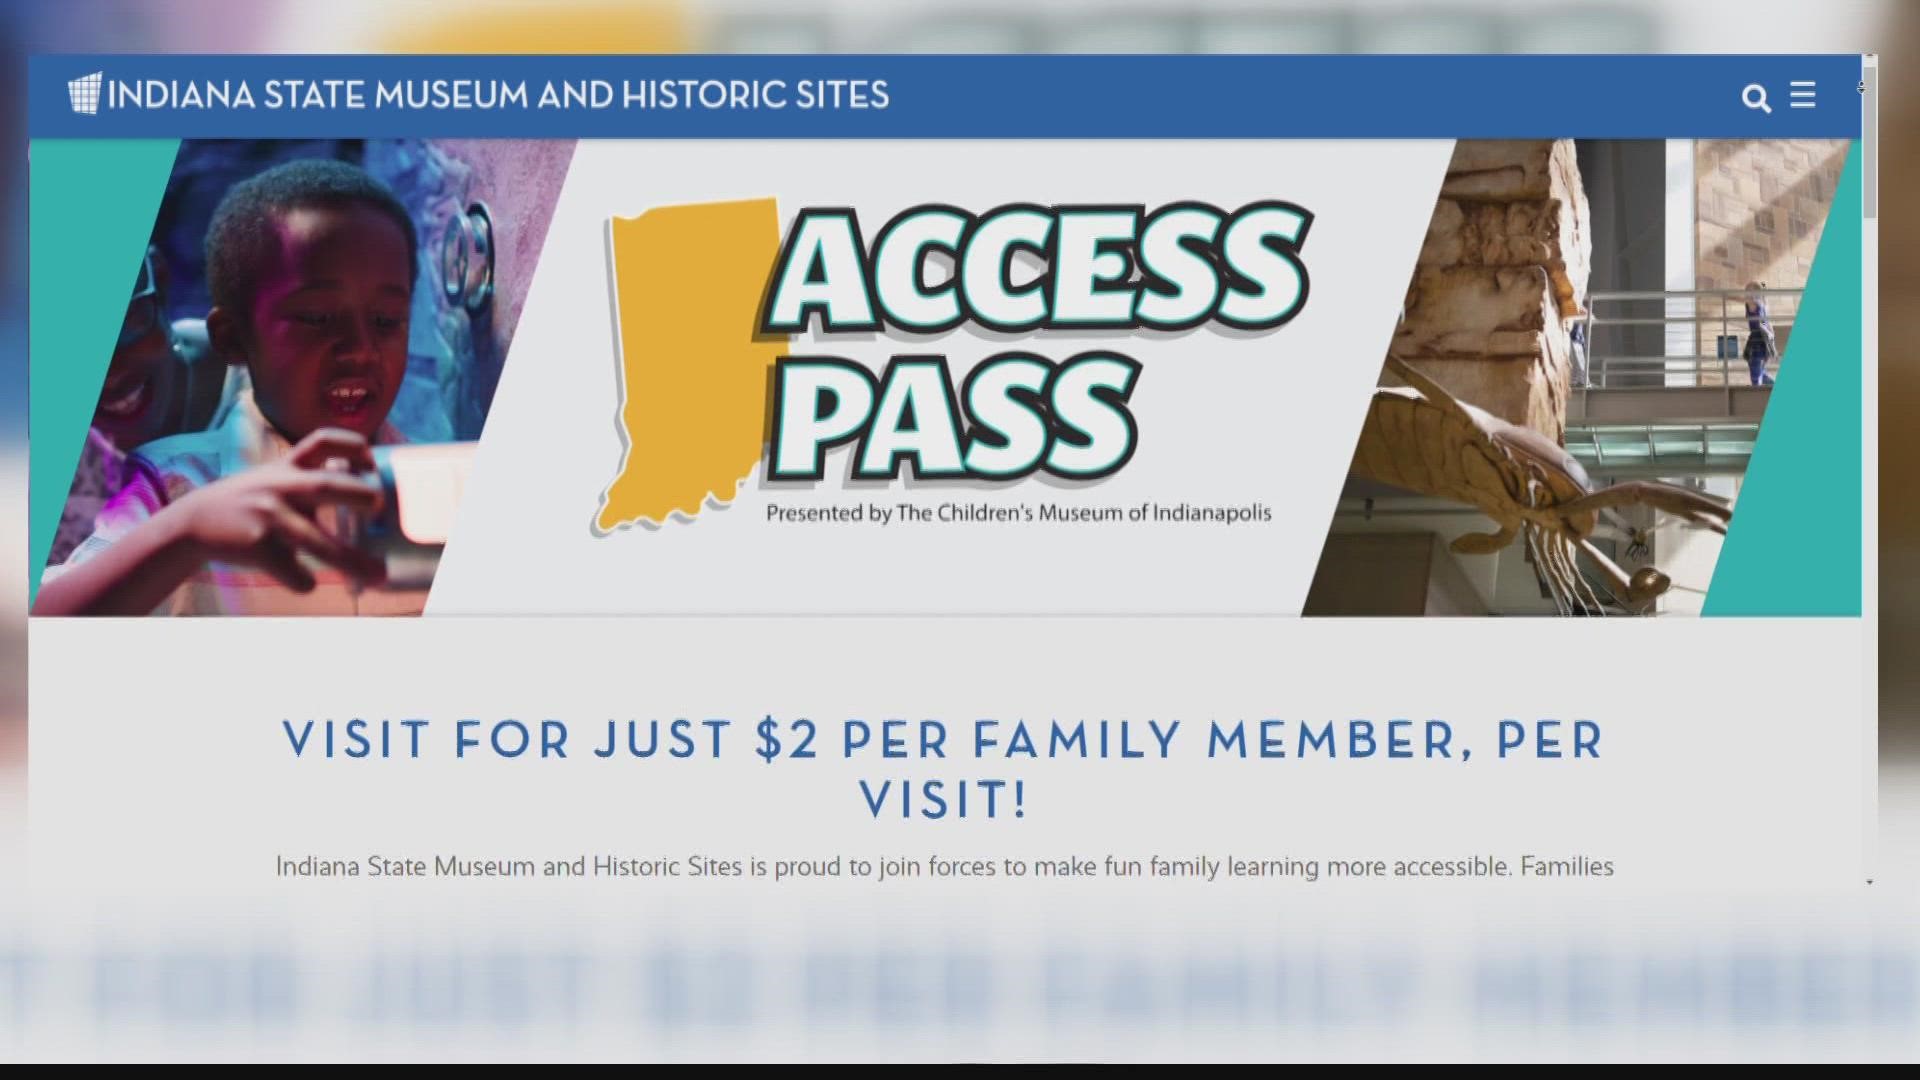 The Children's Museum offers a program, The Access Pass, where qualifying families can get admission for a reduced price.